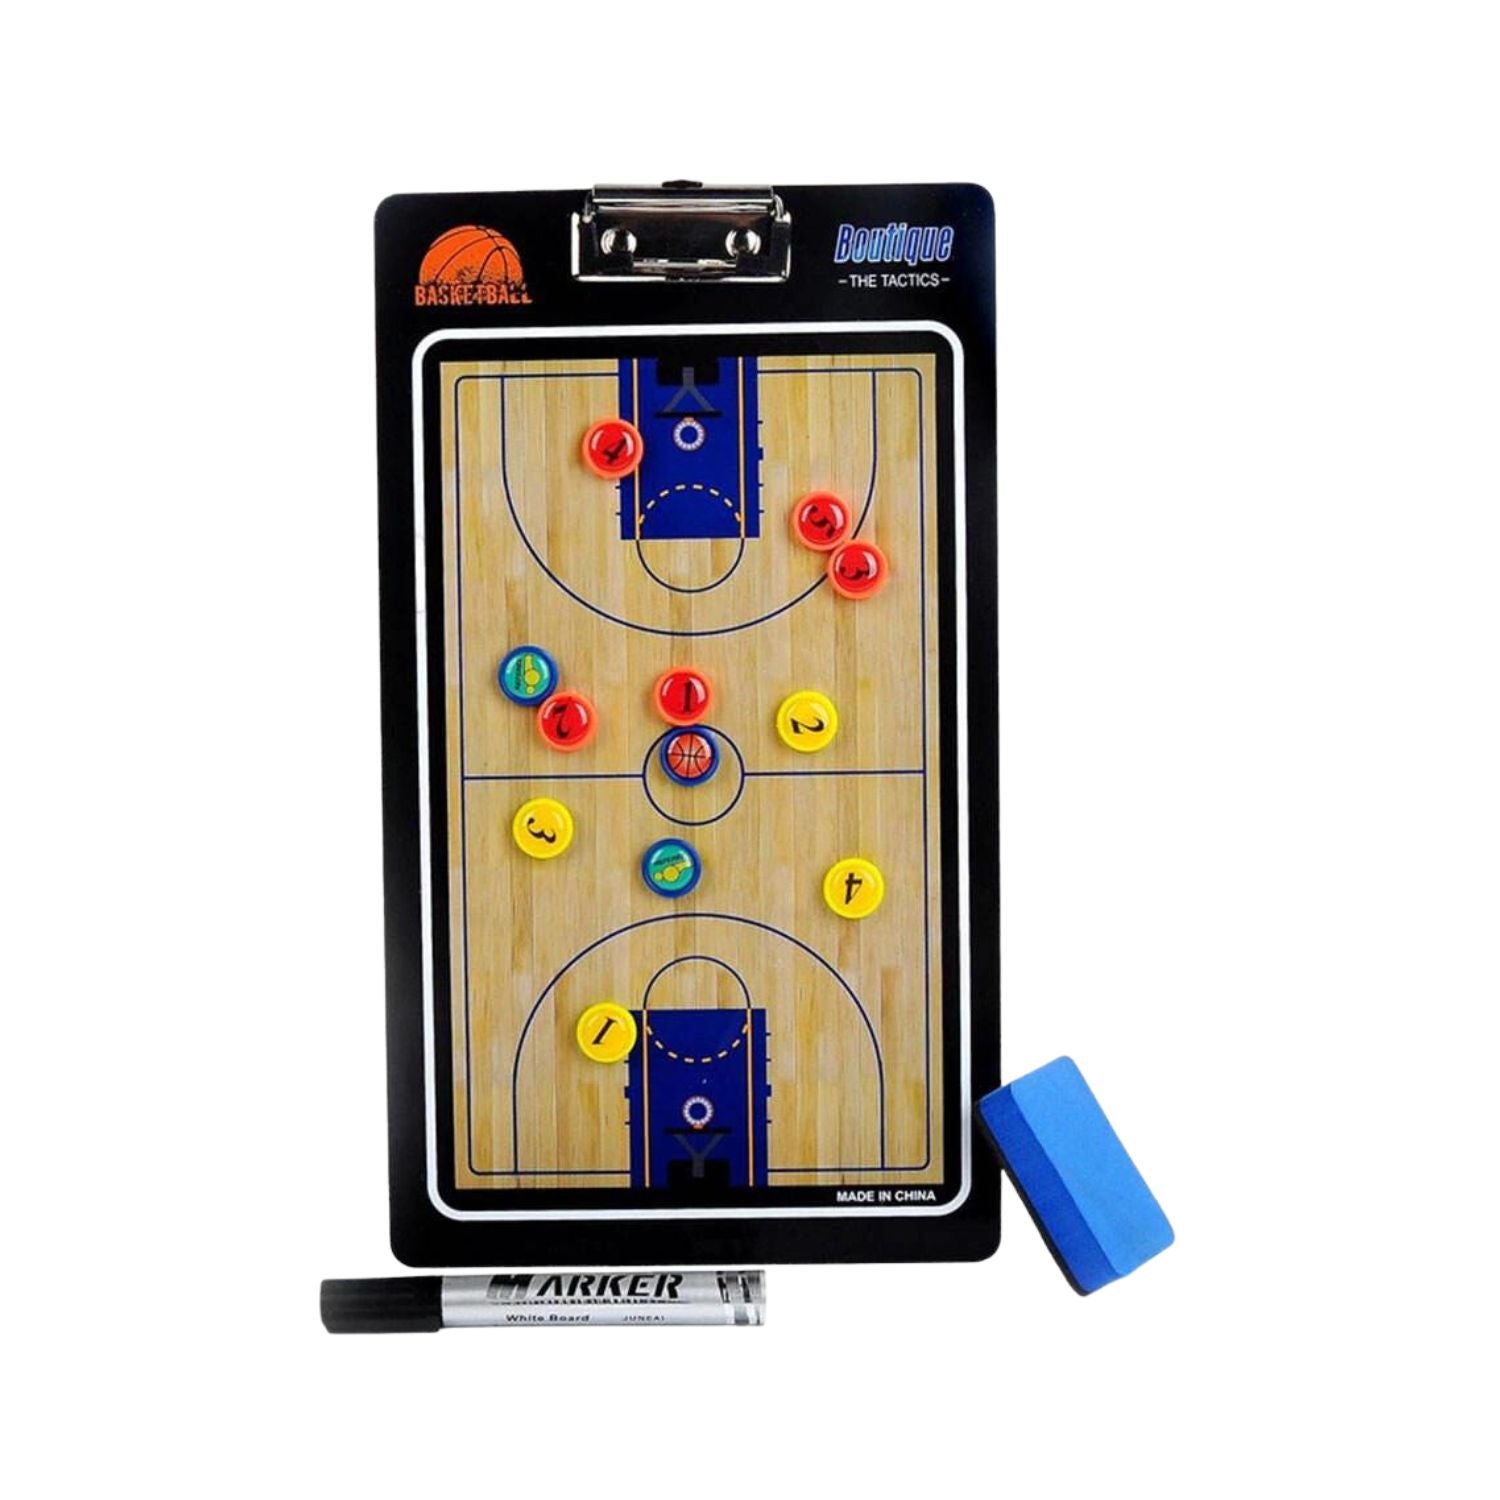 VERPEAK Foldable Basketball Coaching Board with Magnetic Number Pieces & Marker Pen (Black)